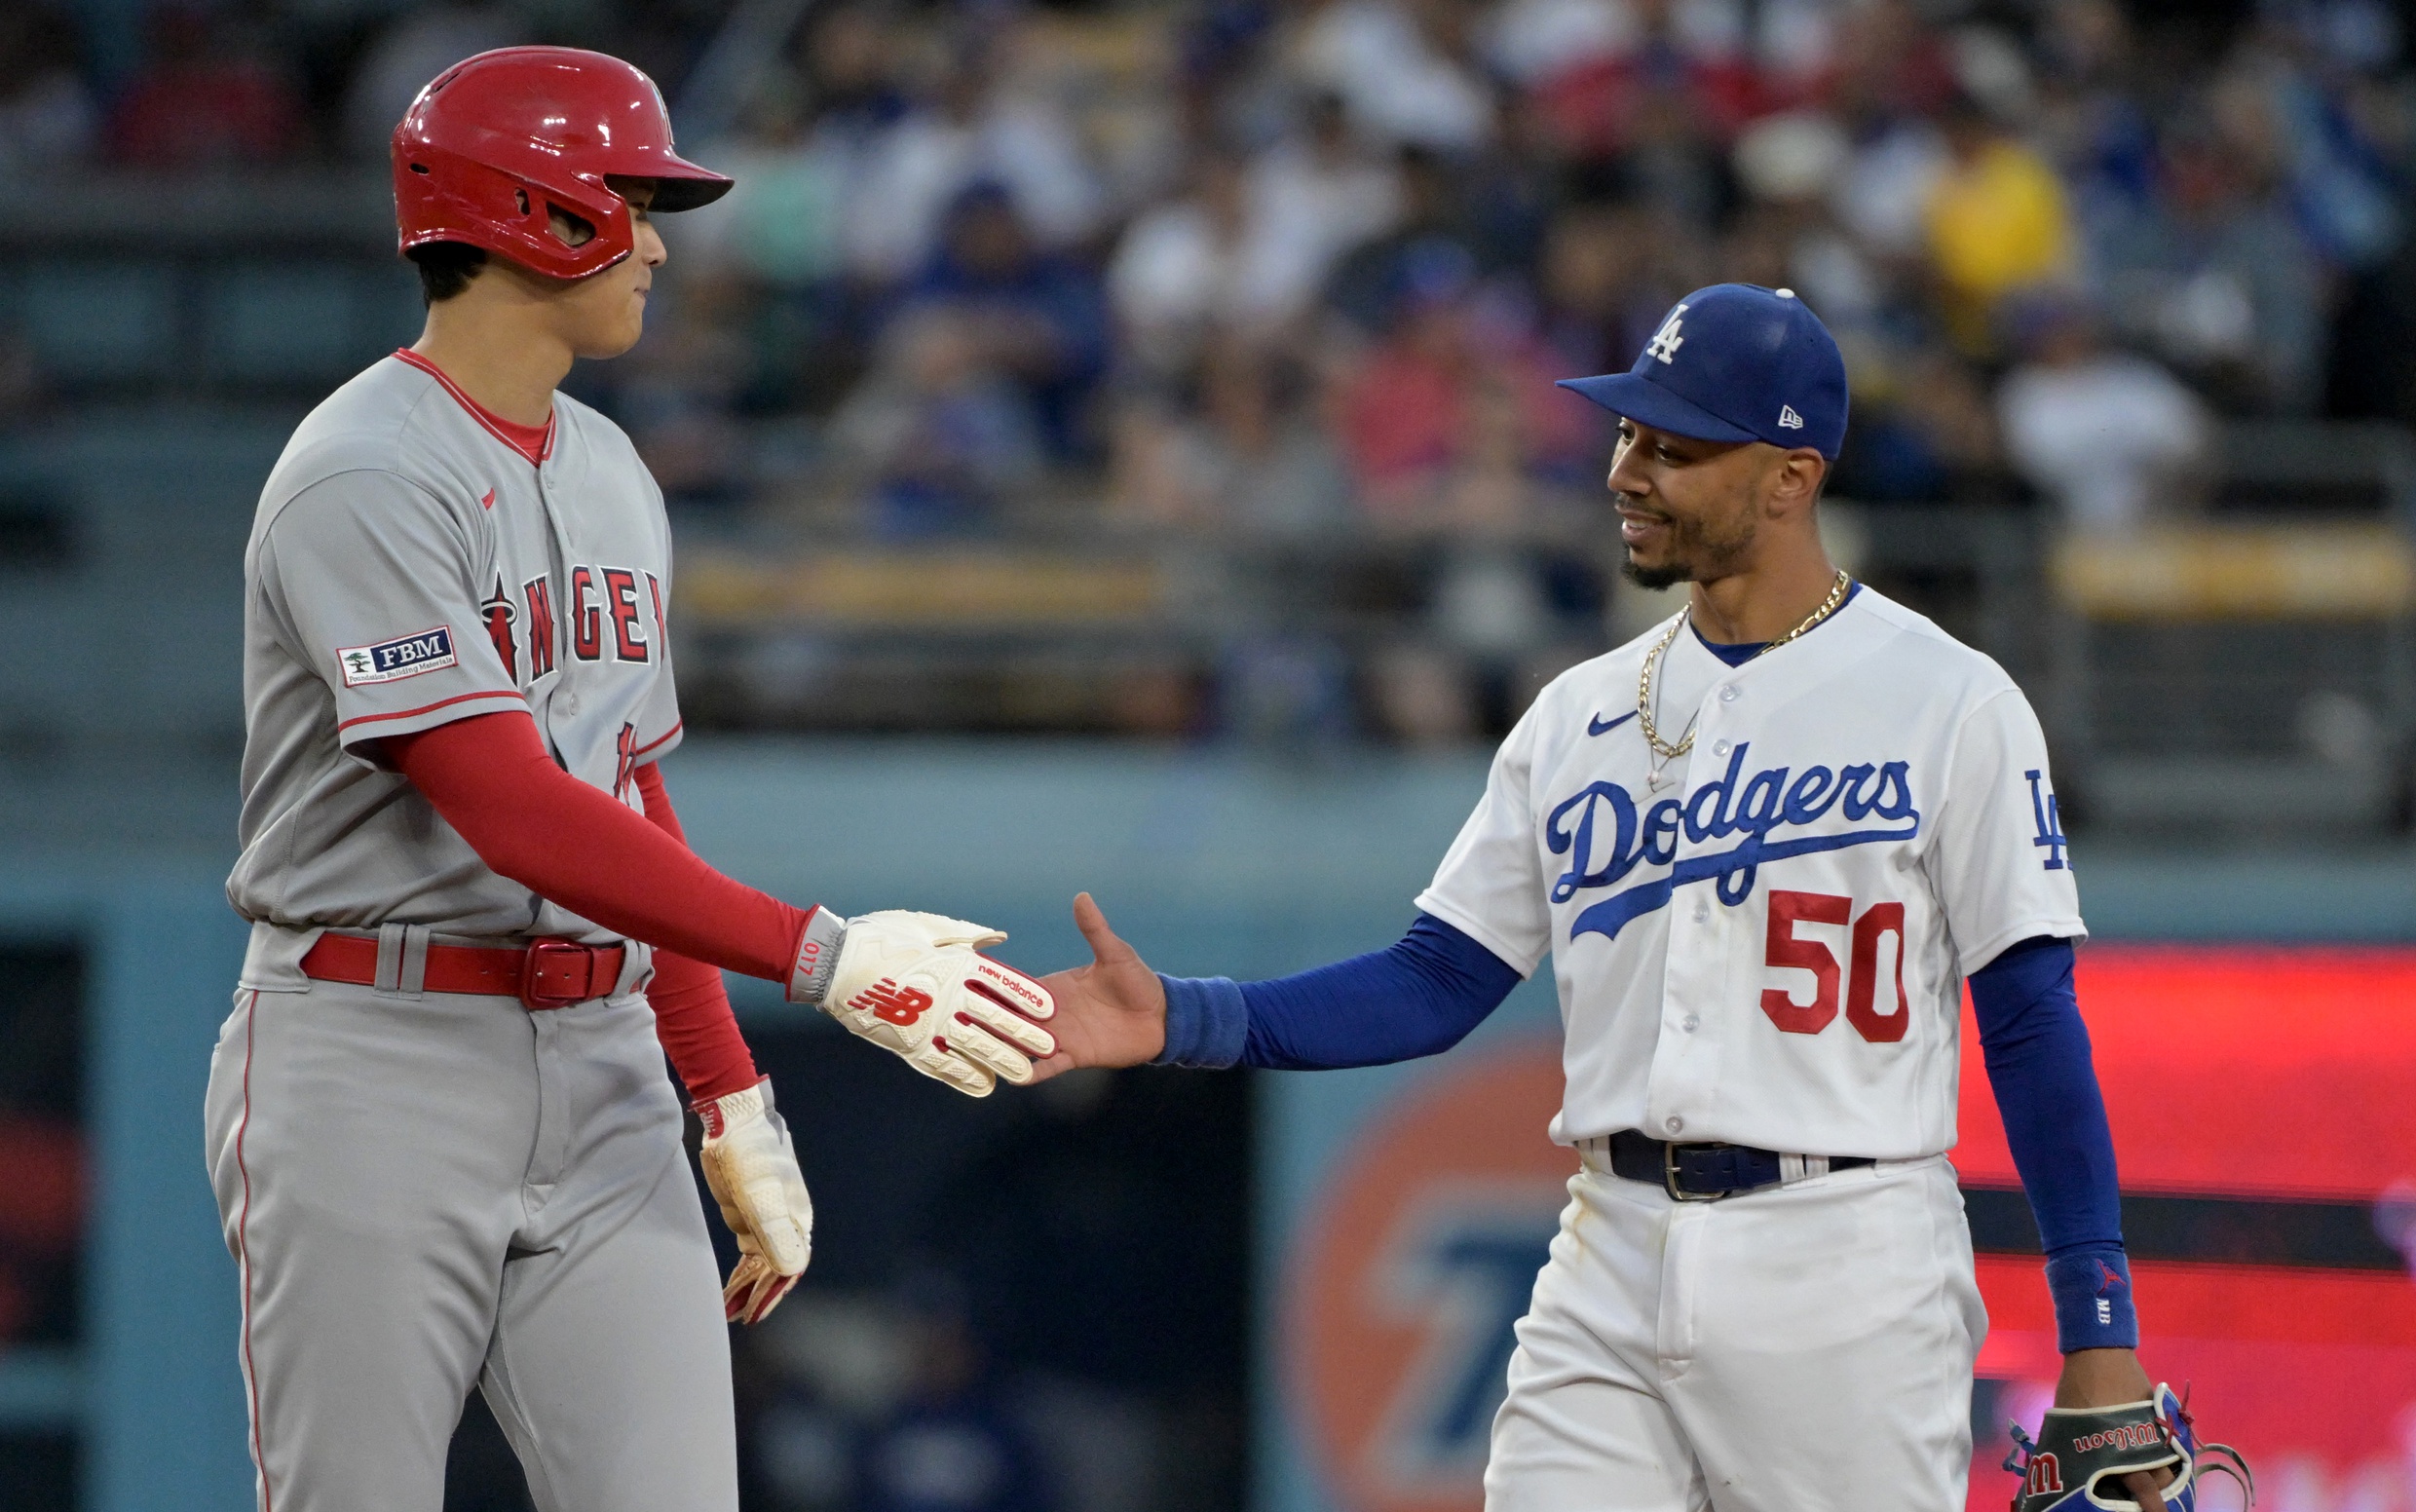 Why Shohei Ohtani trade would be worth insane Dodgers prospect package